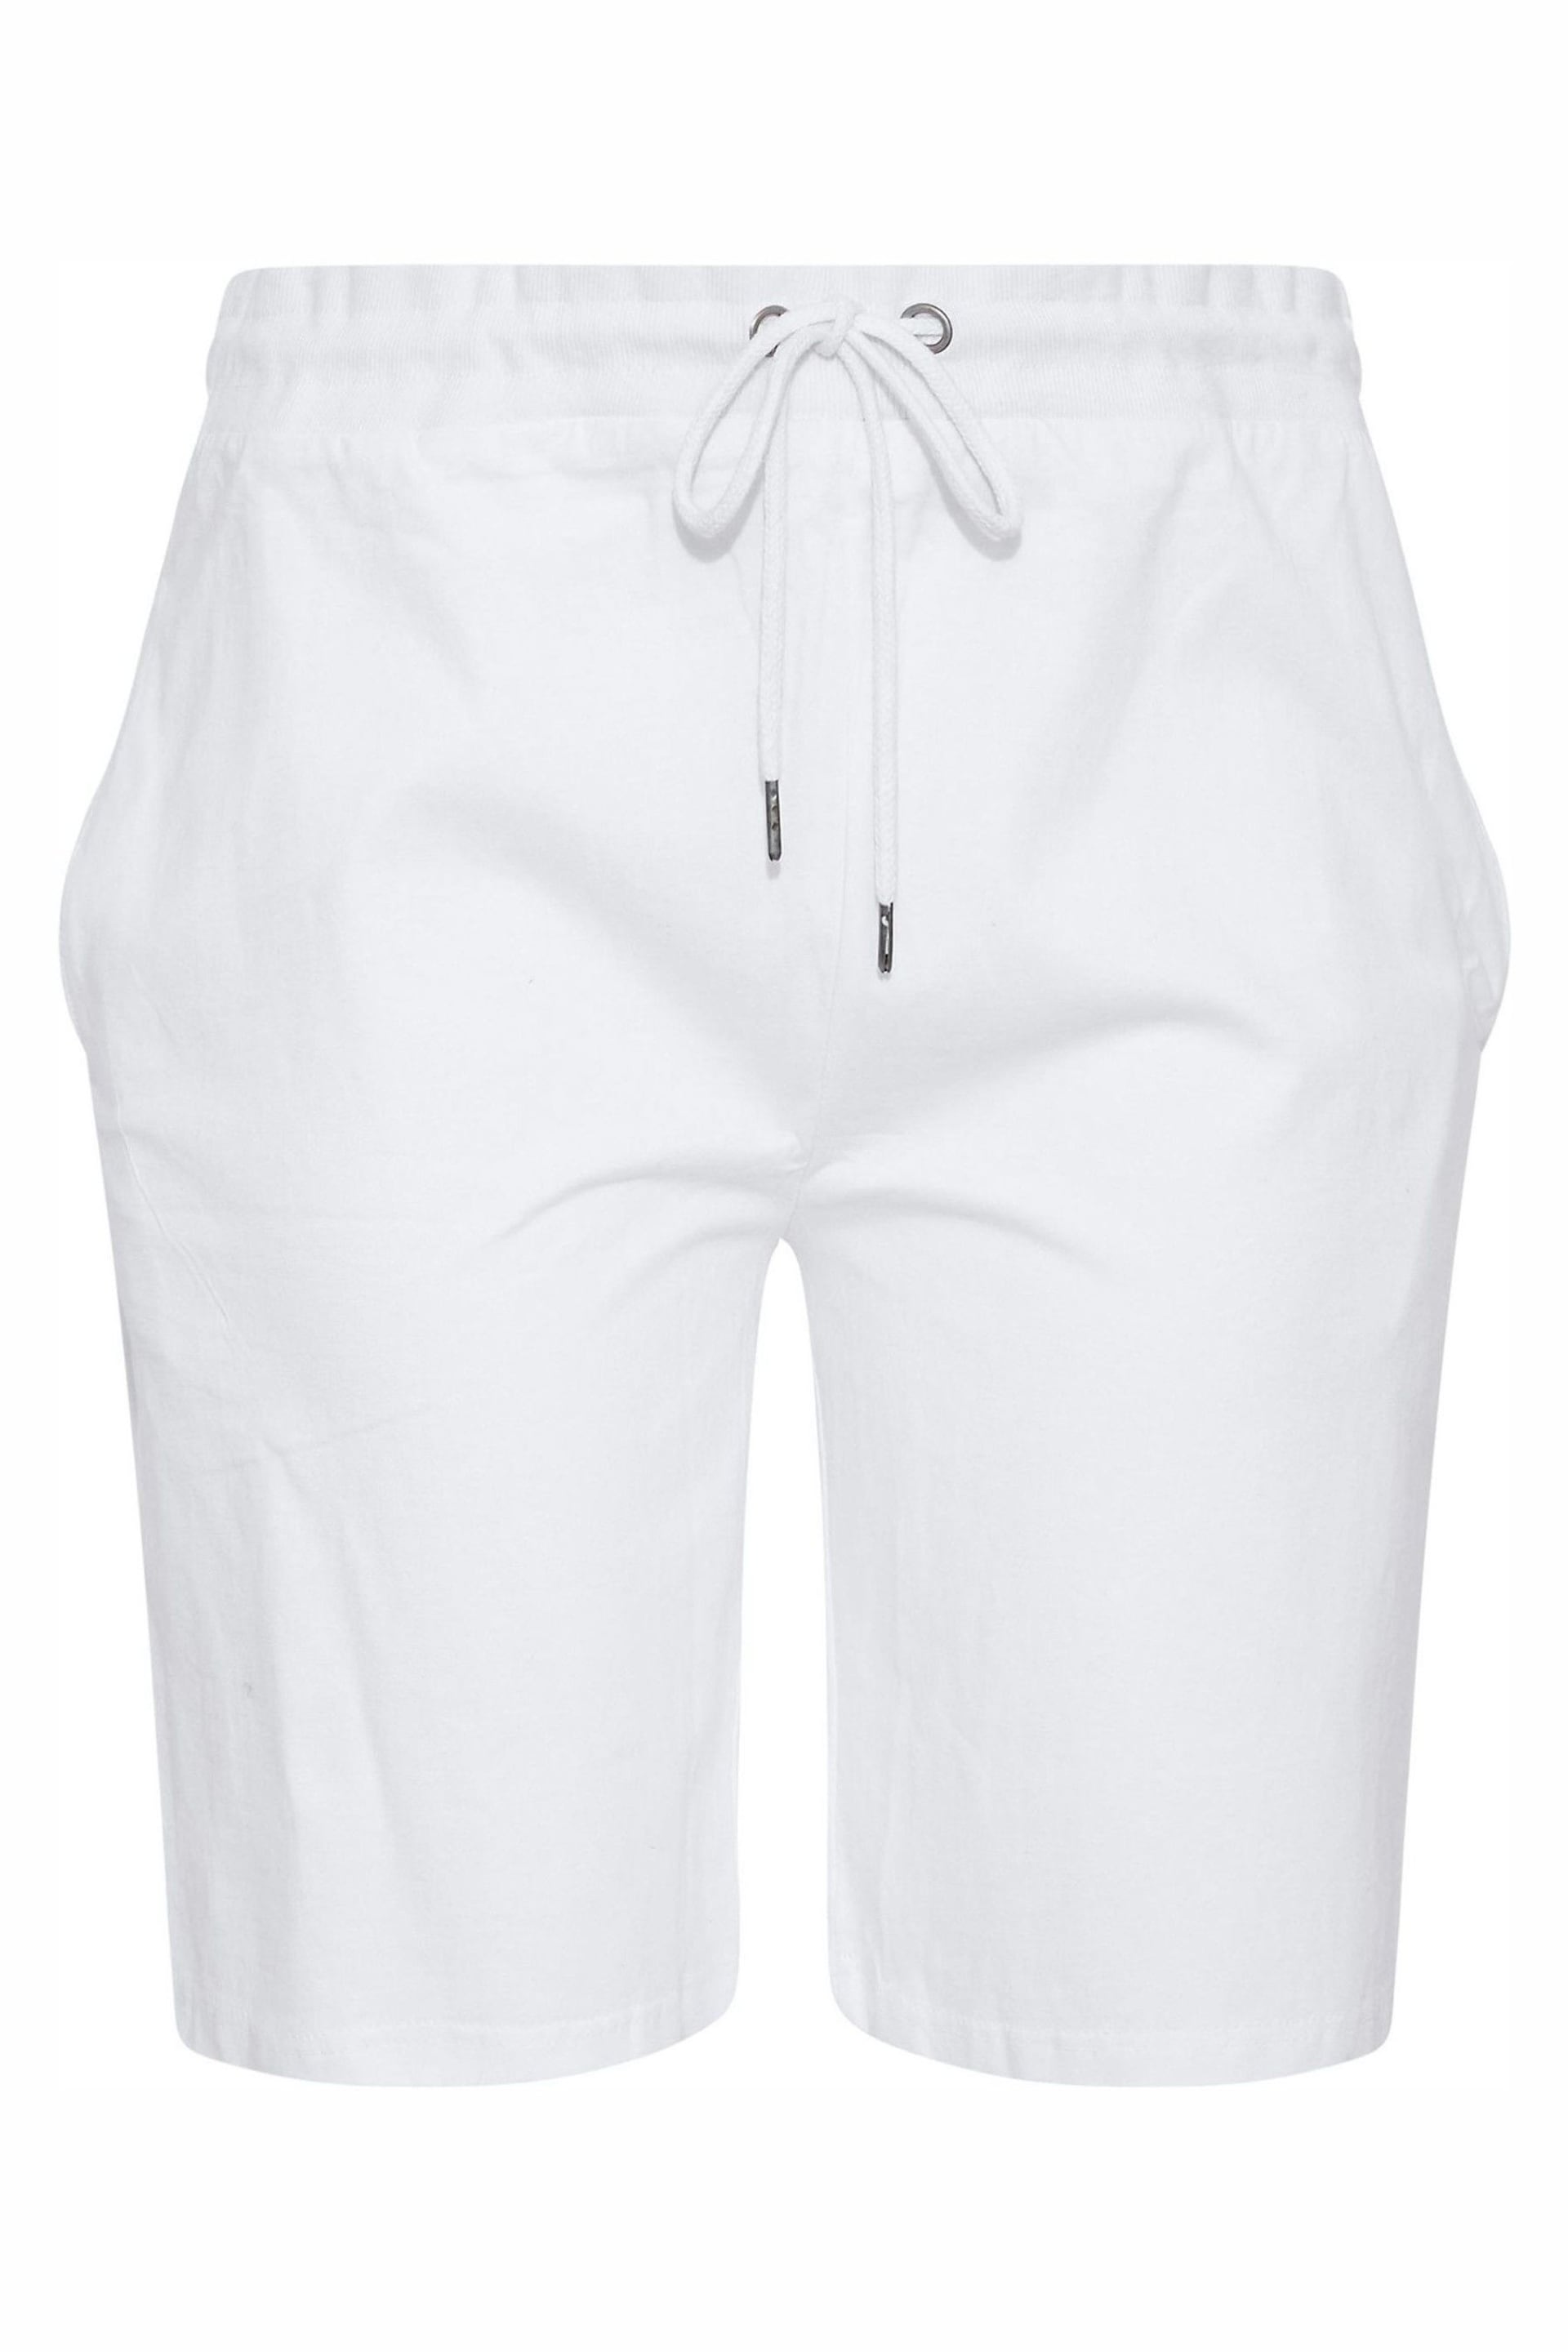 Yours Curve White Jogger Shorts - Image 4 of 4